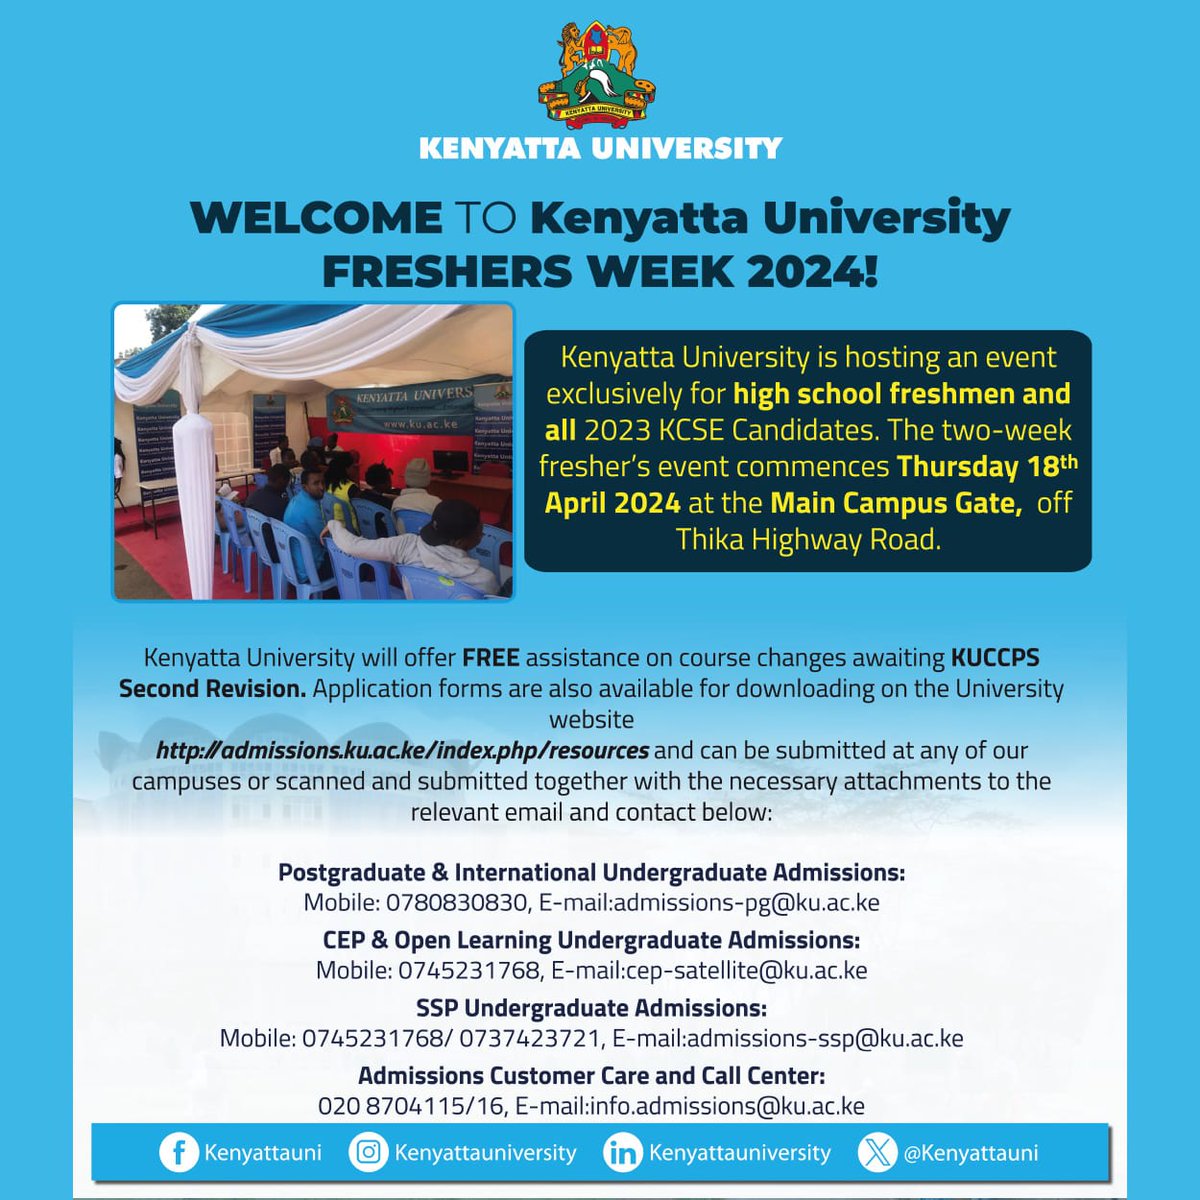 Wondering what to expect during FRESHERS Week at Kenyatta University? Prepare for informative sessions, interactive workshops, and plenty of opportunities to connect with fellow students. #KUFreshersWeek